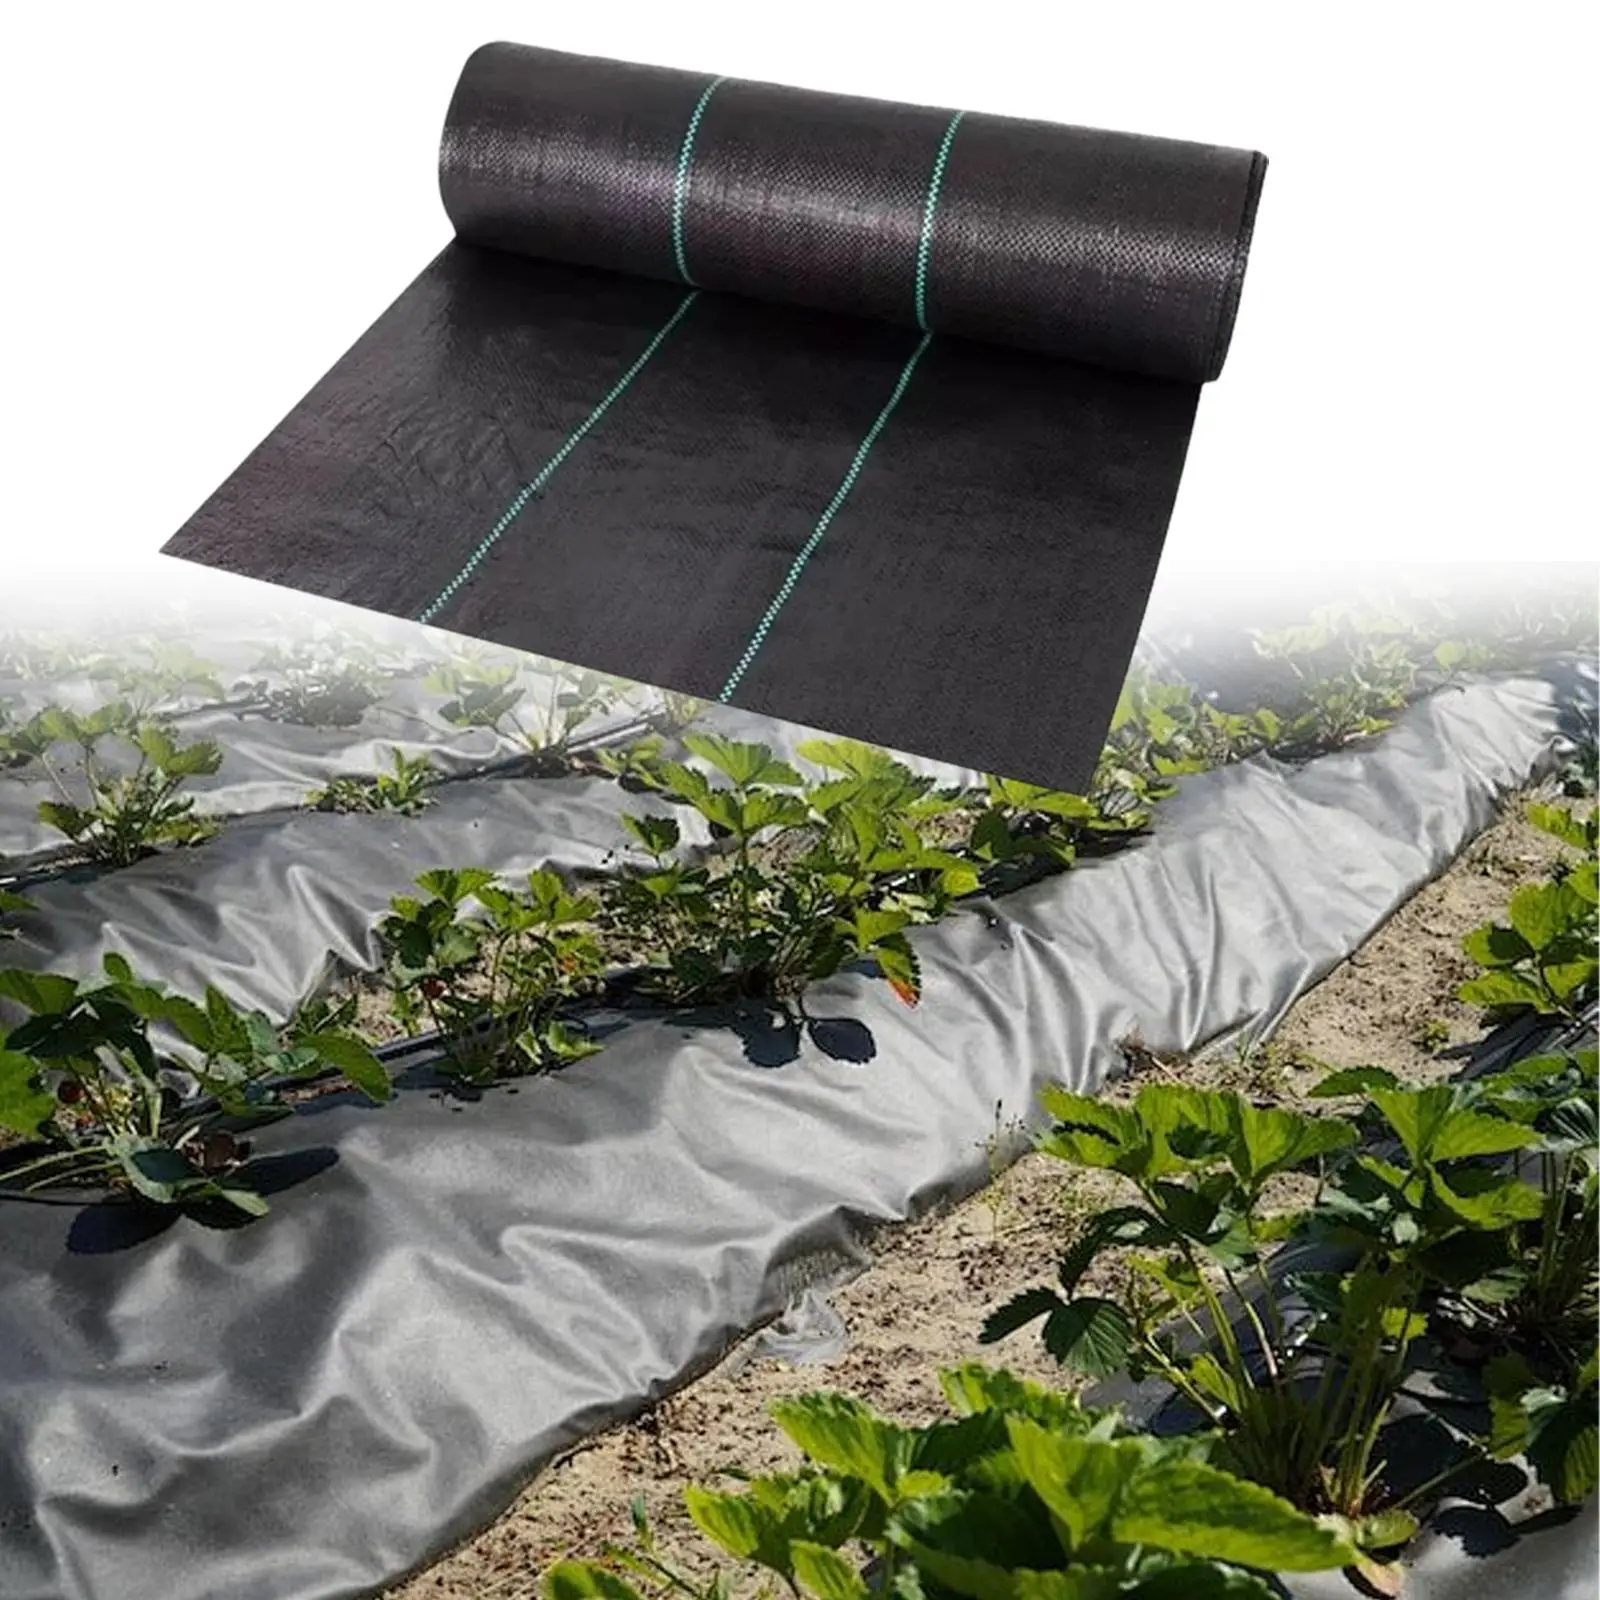 

Weed Barrier Landscape Fabric Ground Cover Weed Block Gardening Mat Garden Weed Barrier Fabric for Driveway Outdoor Yard Garden